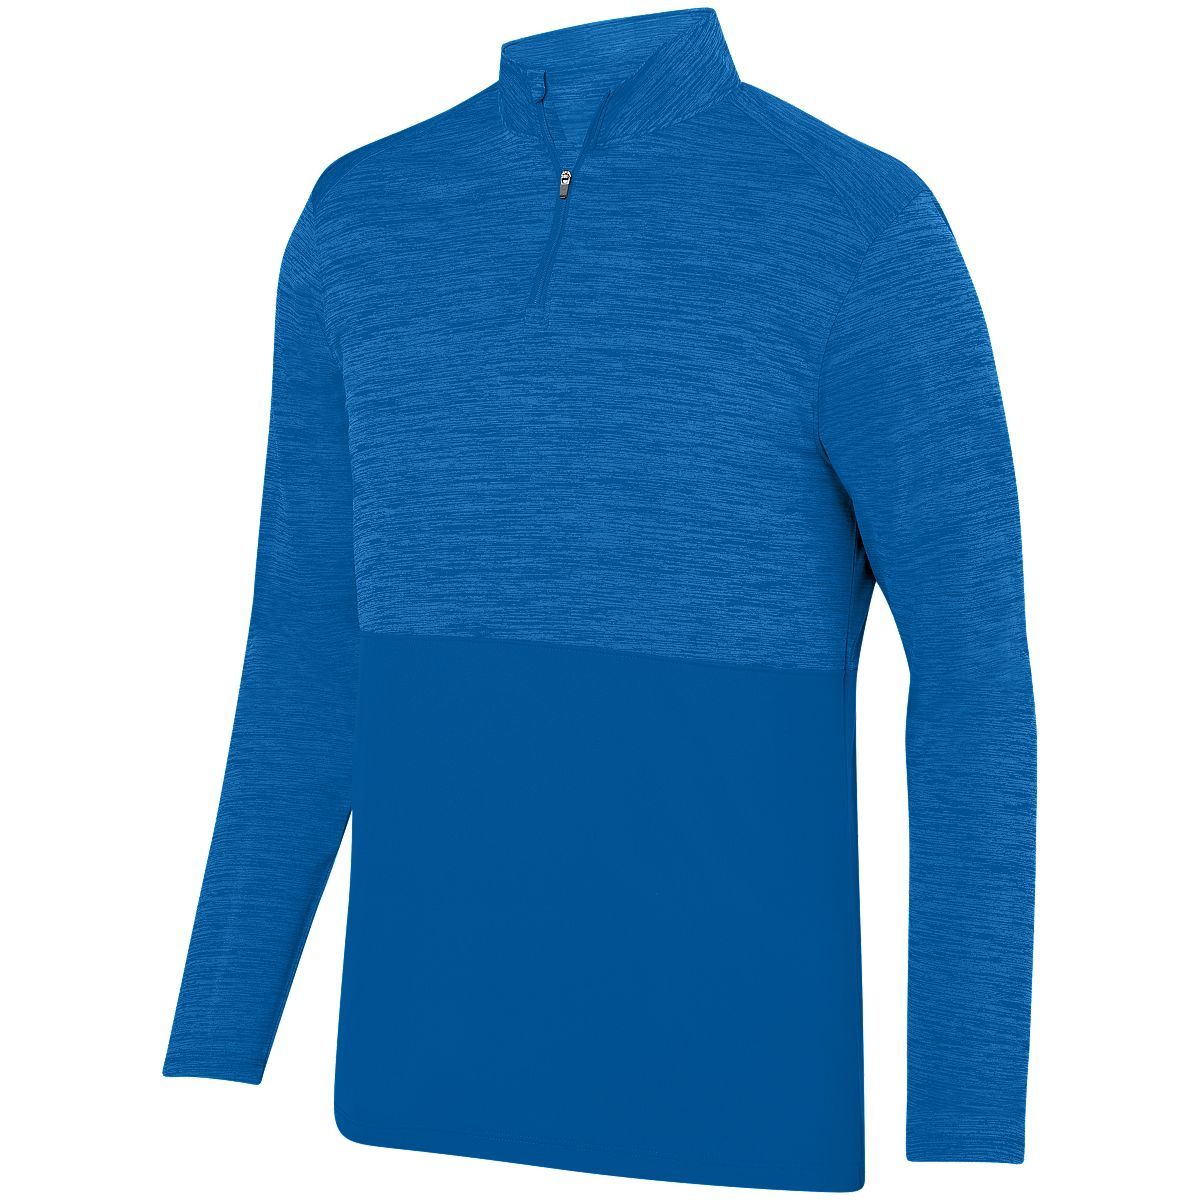 Augusta Sportswear Shadow Tonal Heather 1/4 Zip Pullover in Royal  -Part of the Adult, Adult-Pullover, Augusta-Products, Outerwear, Tonal-Fleece-Collection product lines at KanaleyCreations.com